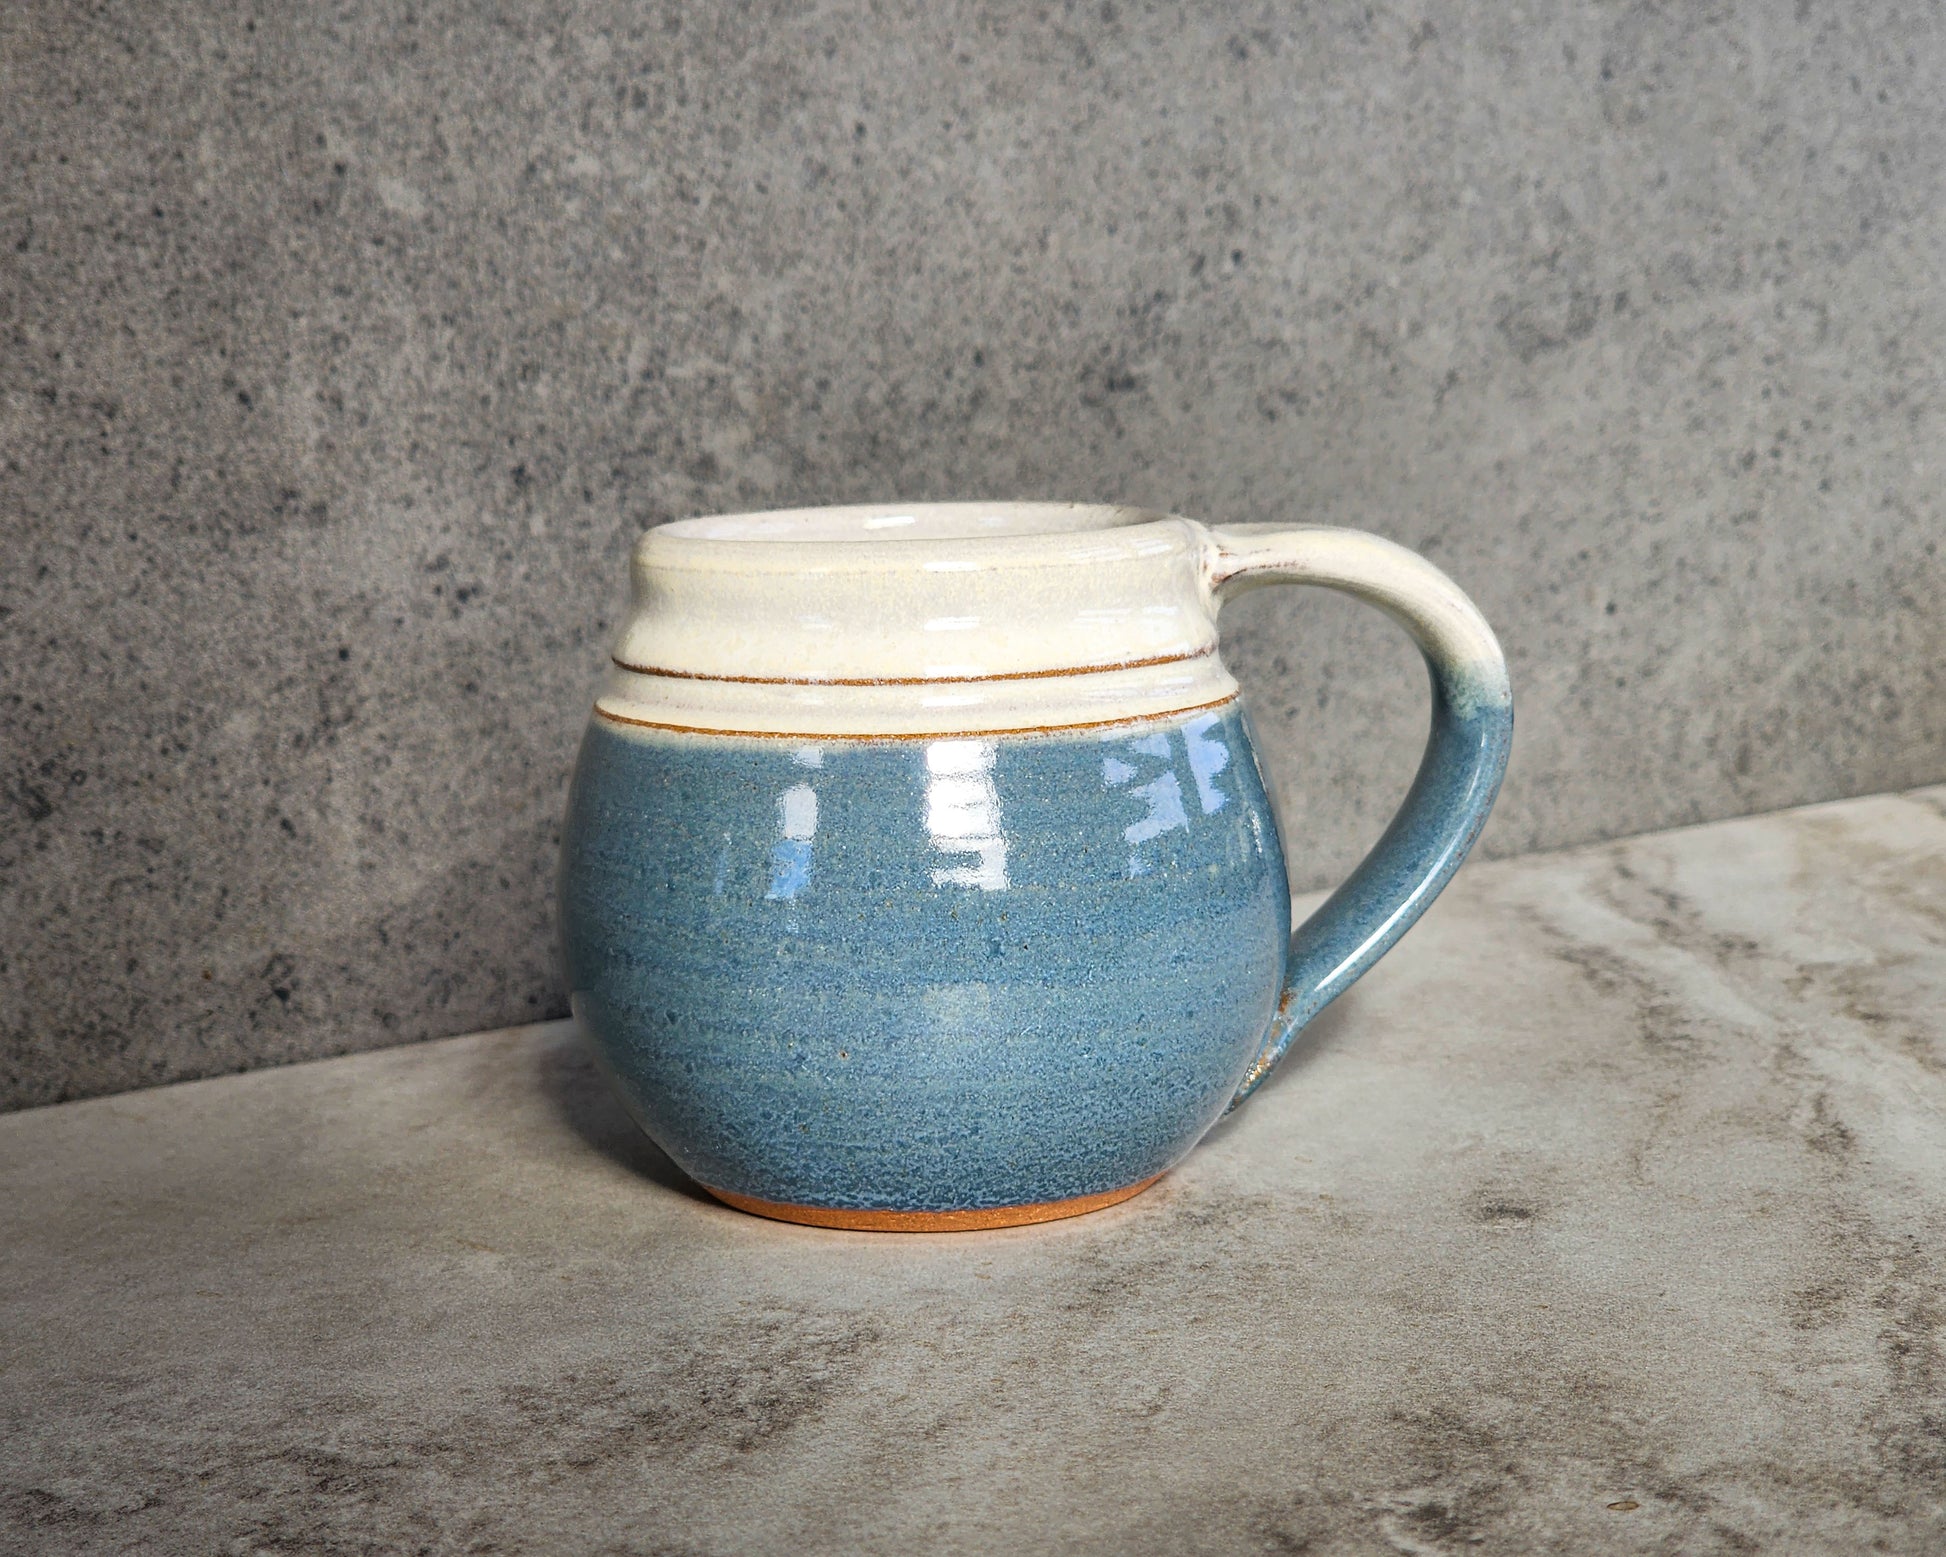 Light Blue: Refresh your senses with the Light Blue small mug by Clinton Pottery. Its tranquil blue color evokes images of clear skies and calm waters, bringing a sense of serenity to your coffee or tea time. Start your day on a peaceful note with this soothing mug.